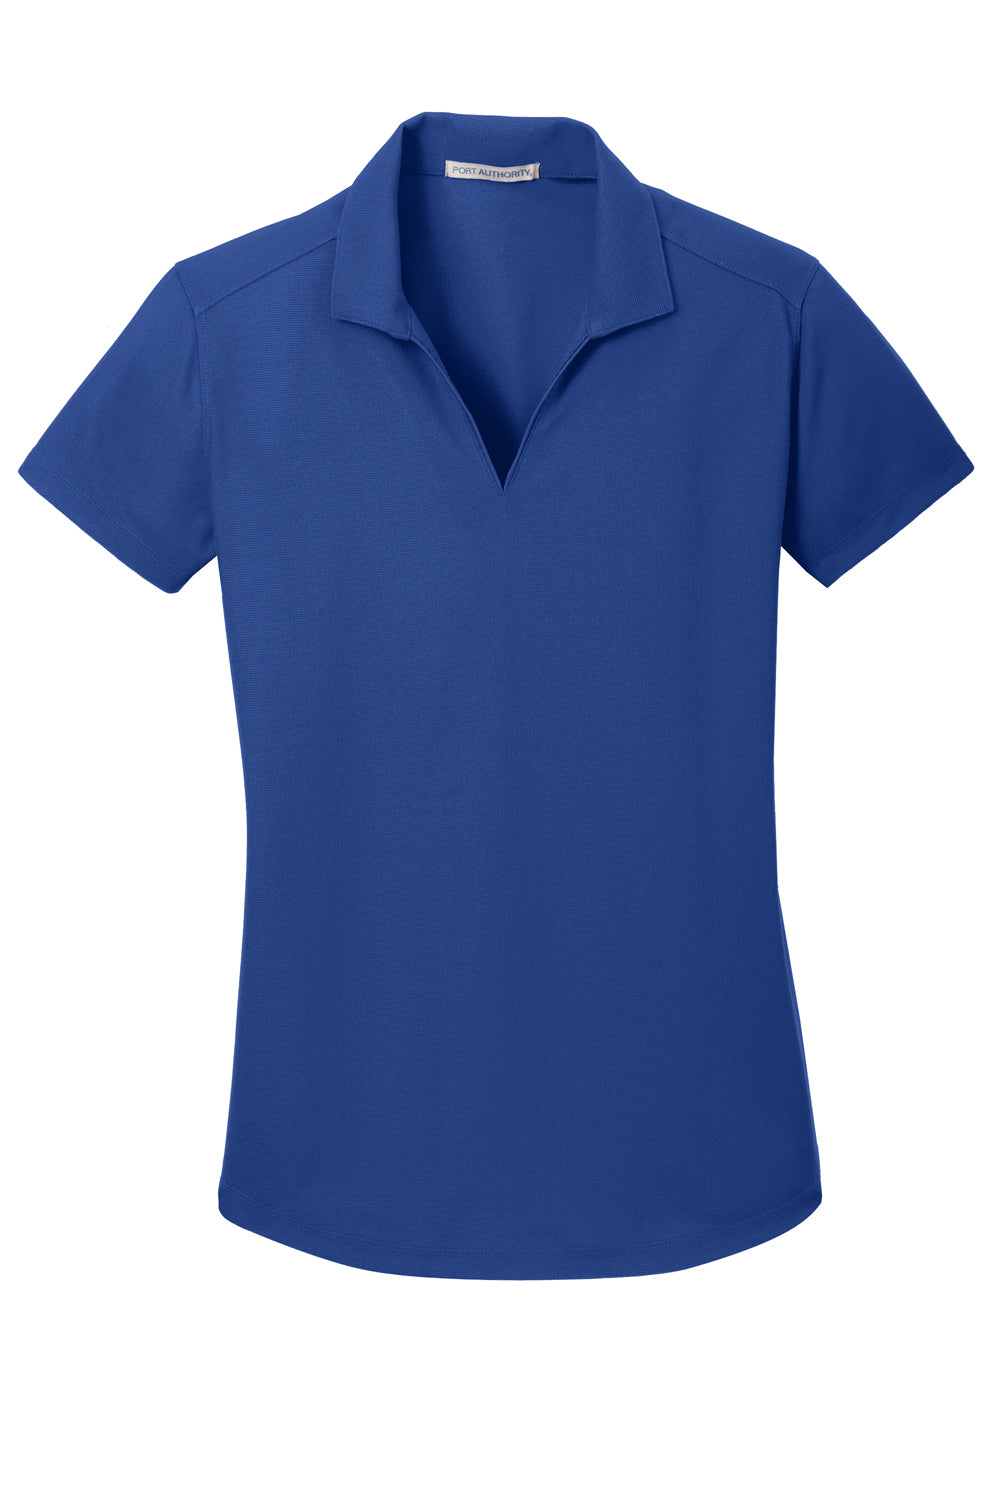 Port Authority L572 Womens Dry Zone Moisture Wicking Short Sleeve Polo Shirt True Royal Blue Flat Front